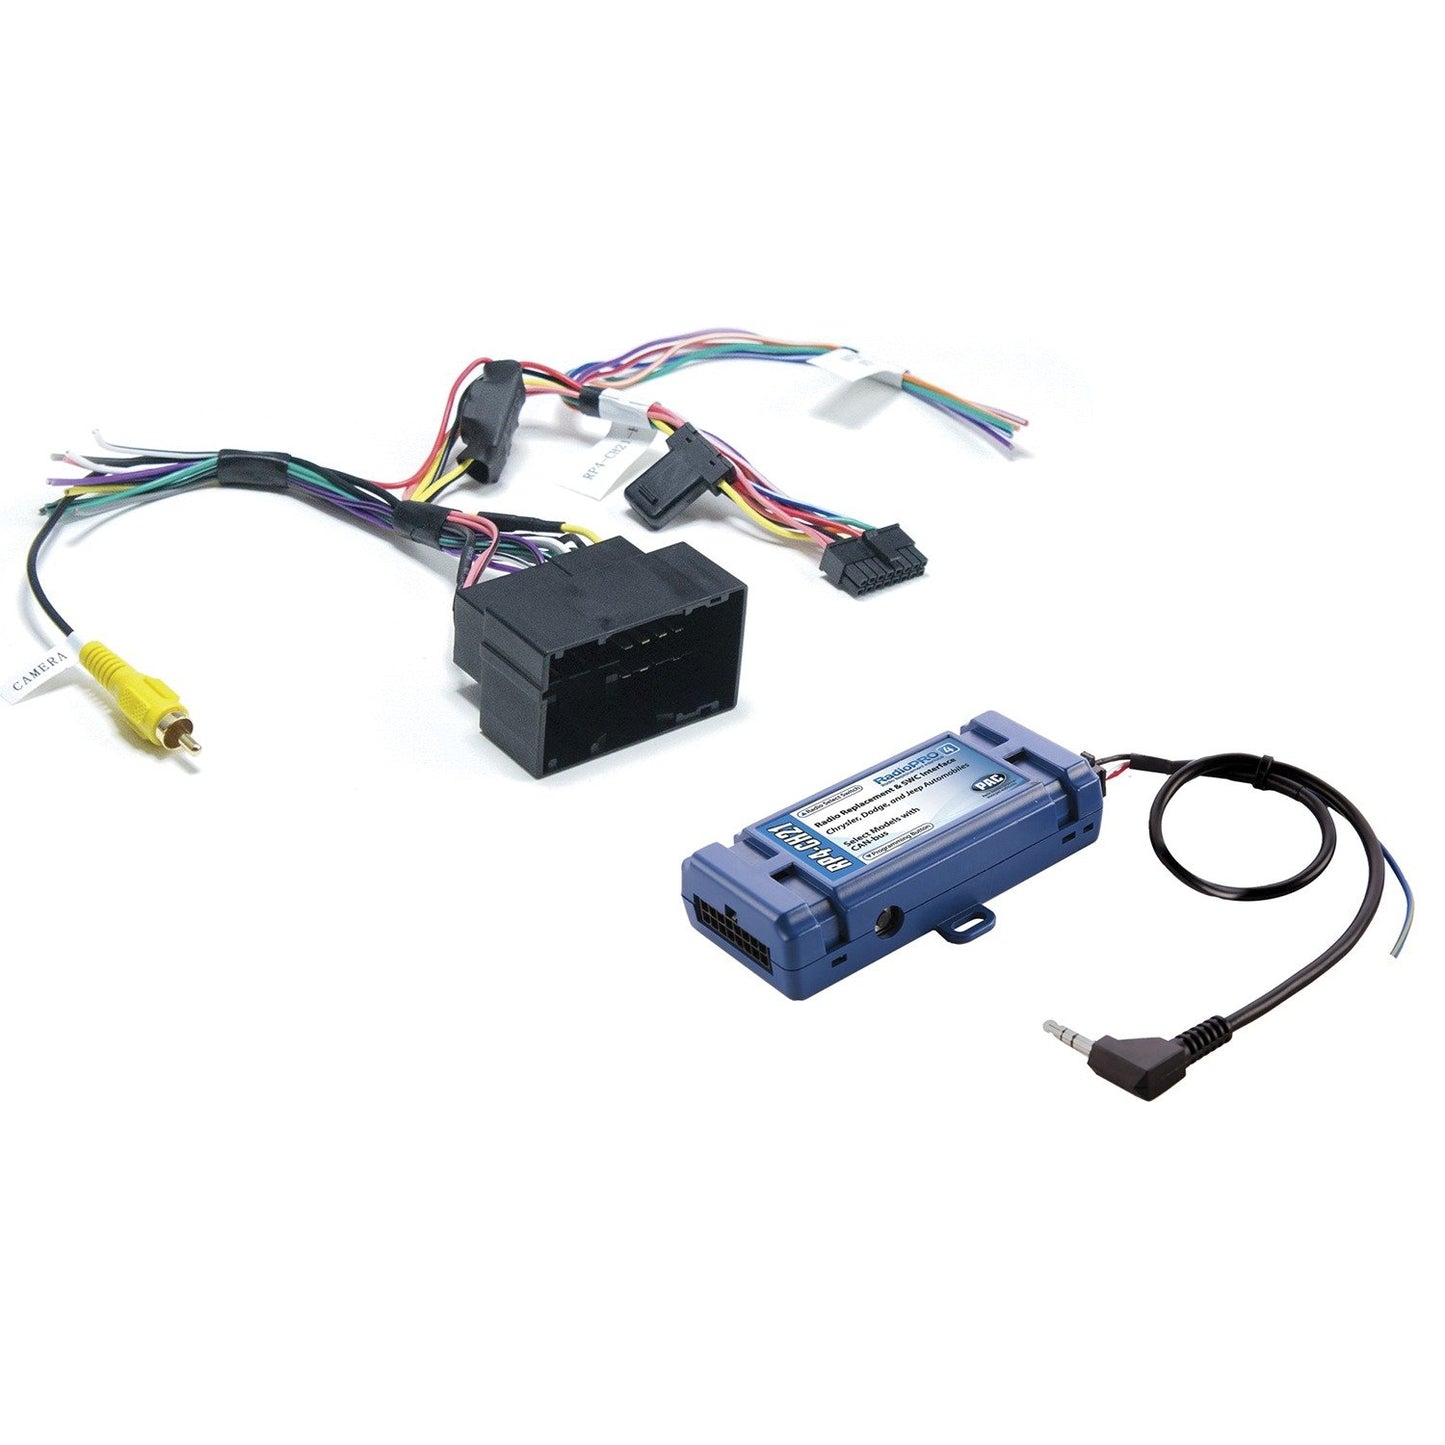 PAC RP4-CH21 RadioPRO4 Interface for Select 13-18 Chrysler Vehicles w/CANbus